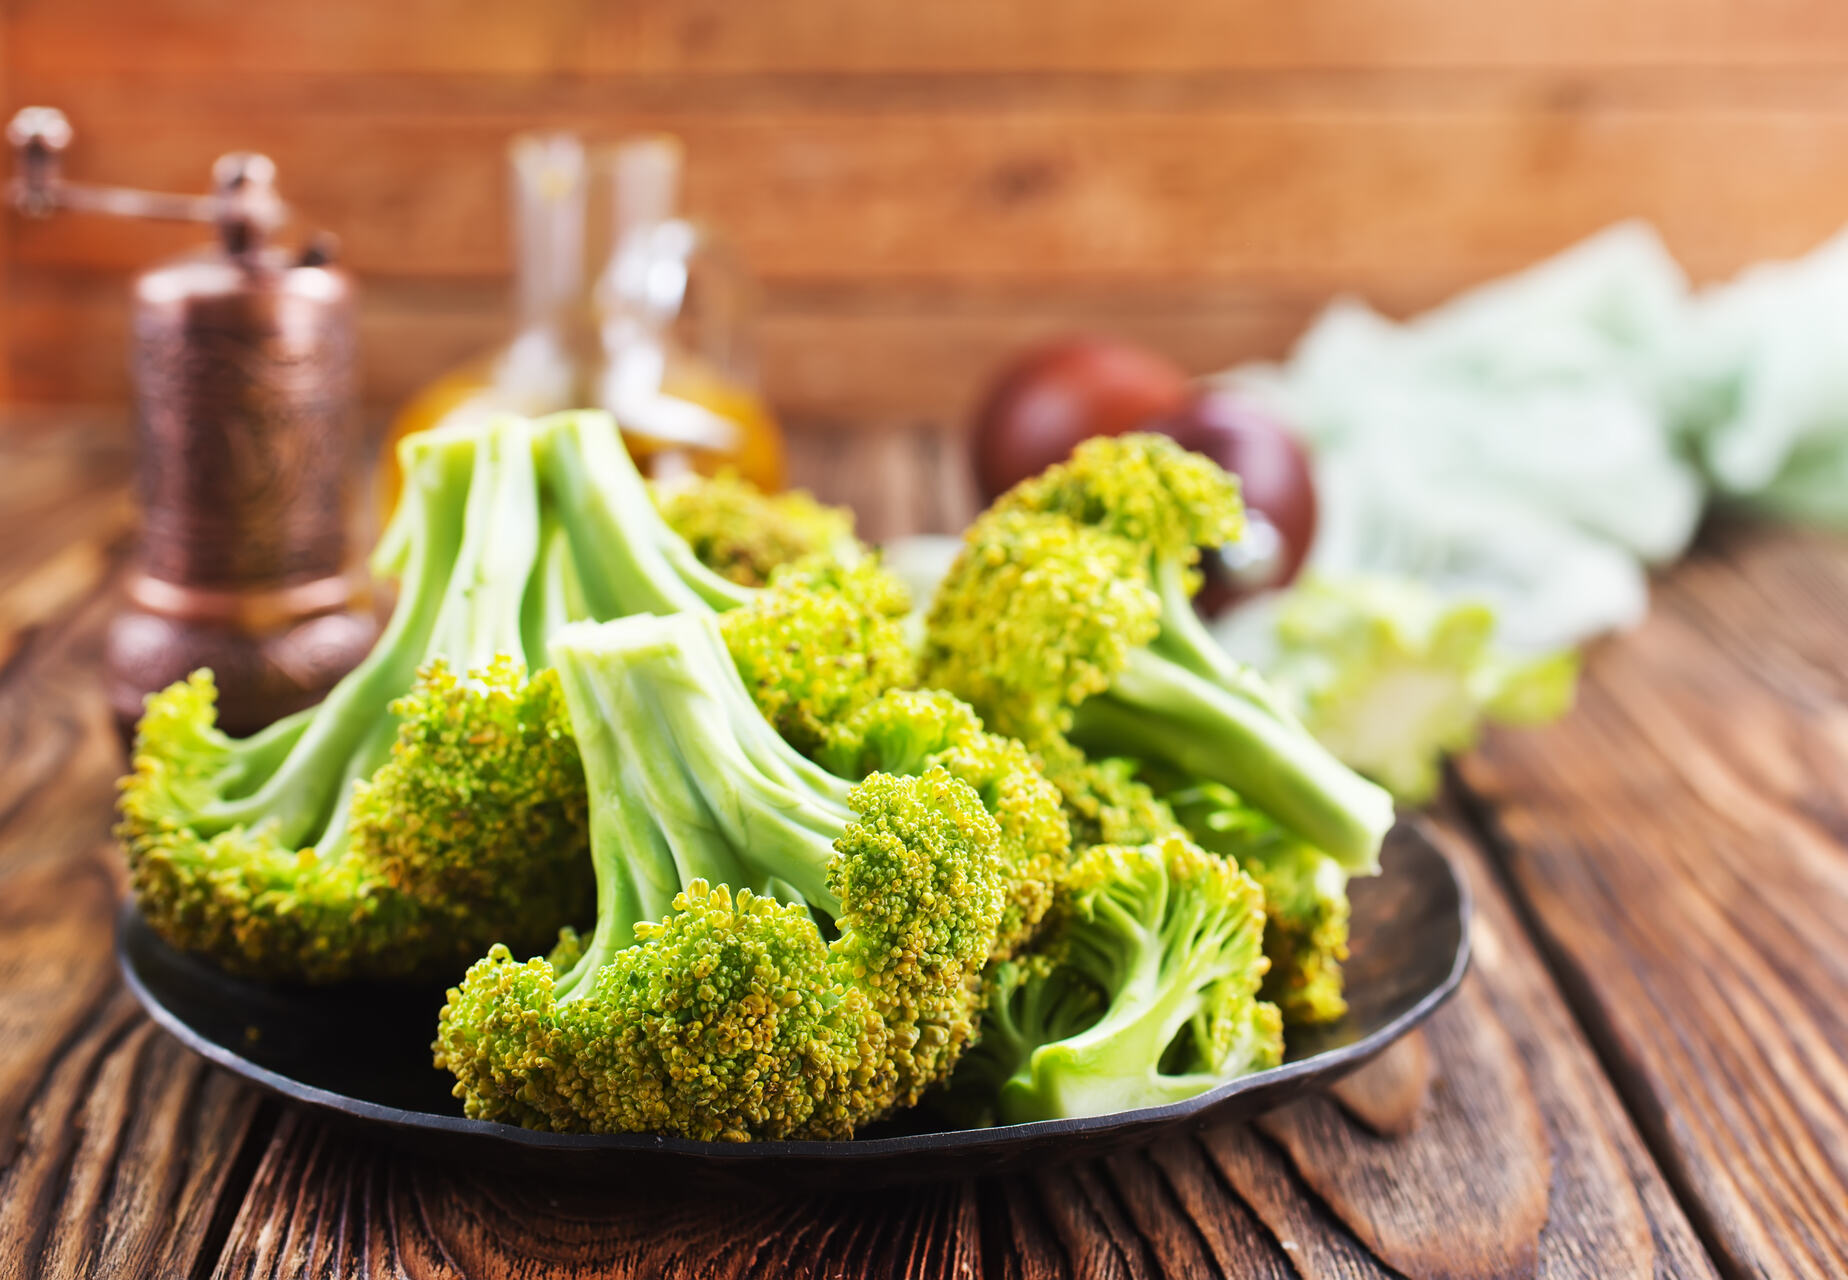 A plate of broccoli on a wooden table